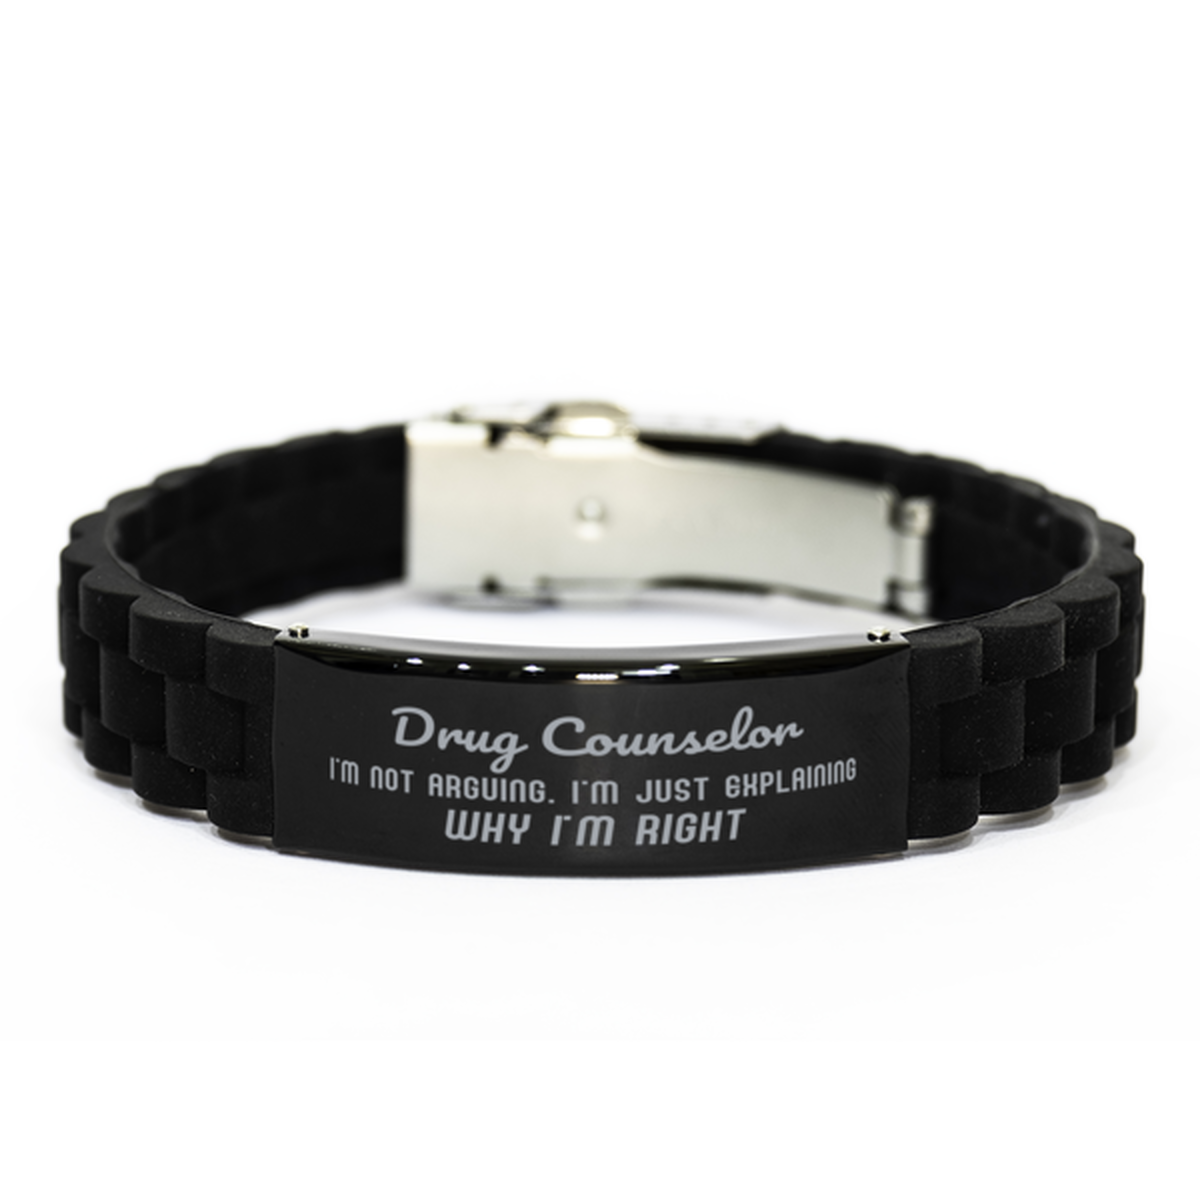 Drug Counselor I'm not Arguing. I'm Just Explaining Why I'm RIGHT Black Glidelock Clasp Bracelet, Funny Saying Quote Drug Counselor Gifts For Drug Counselor Graduation Birthday Christmas Gifts for Men Women Coworker